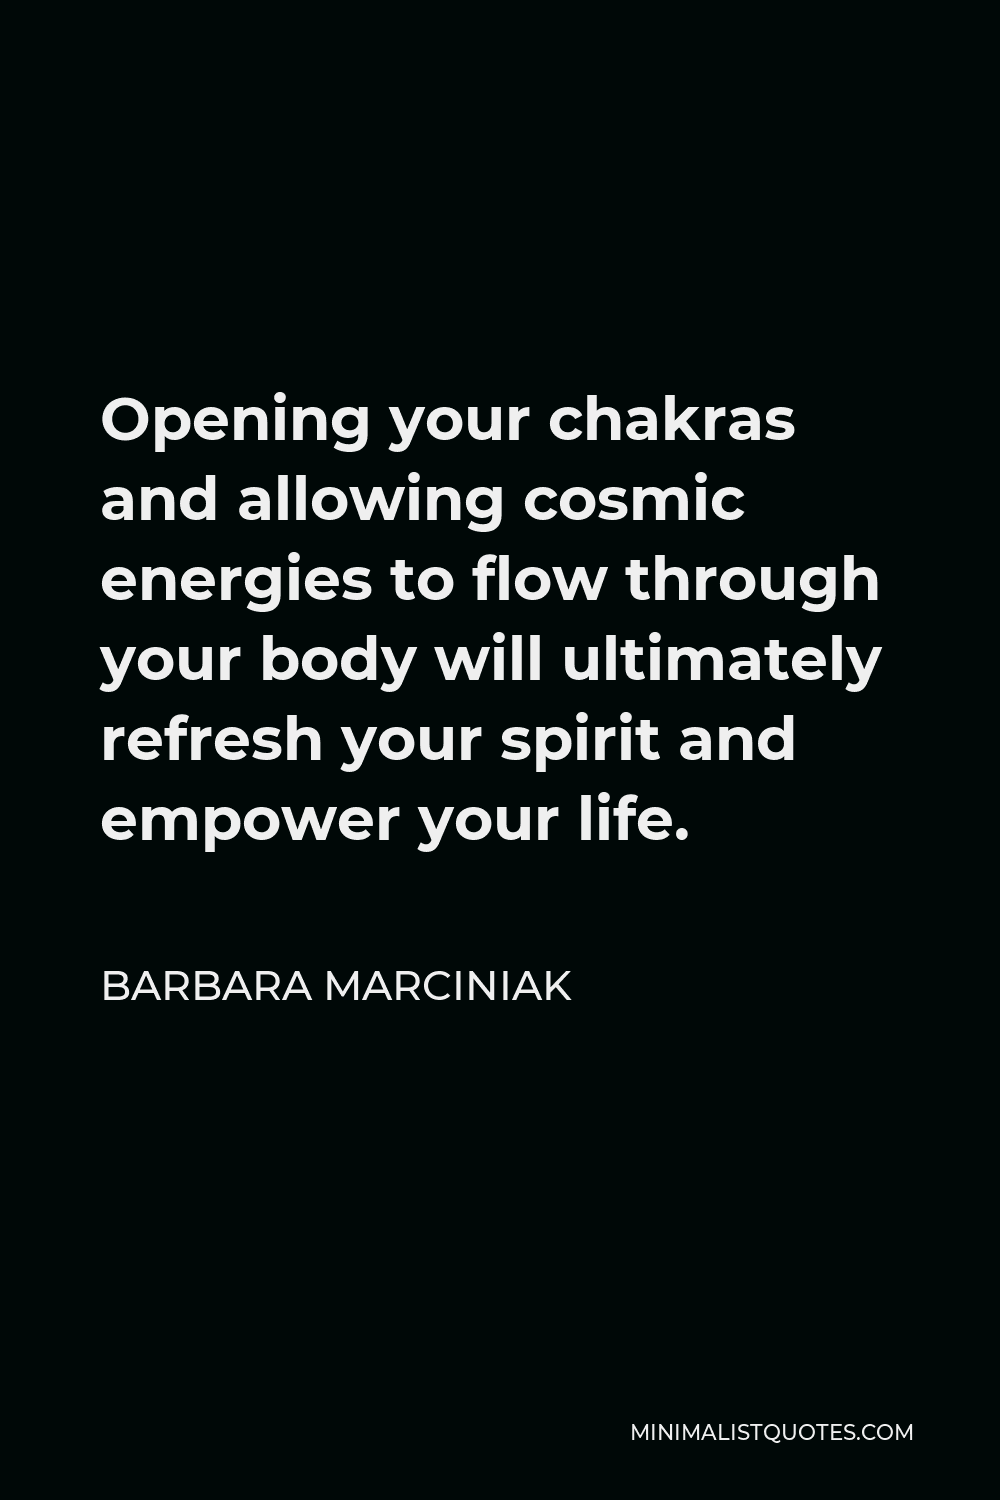 Barbara Marciniak Quote - Opening your chakras and allowing cosmic energies to flow through your body will ultimately refresh your spirit and empower your life.